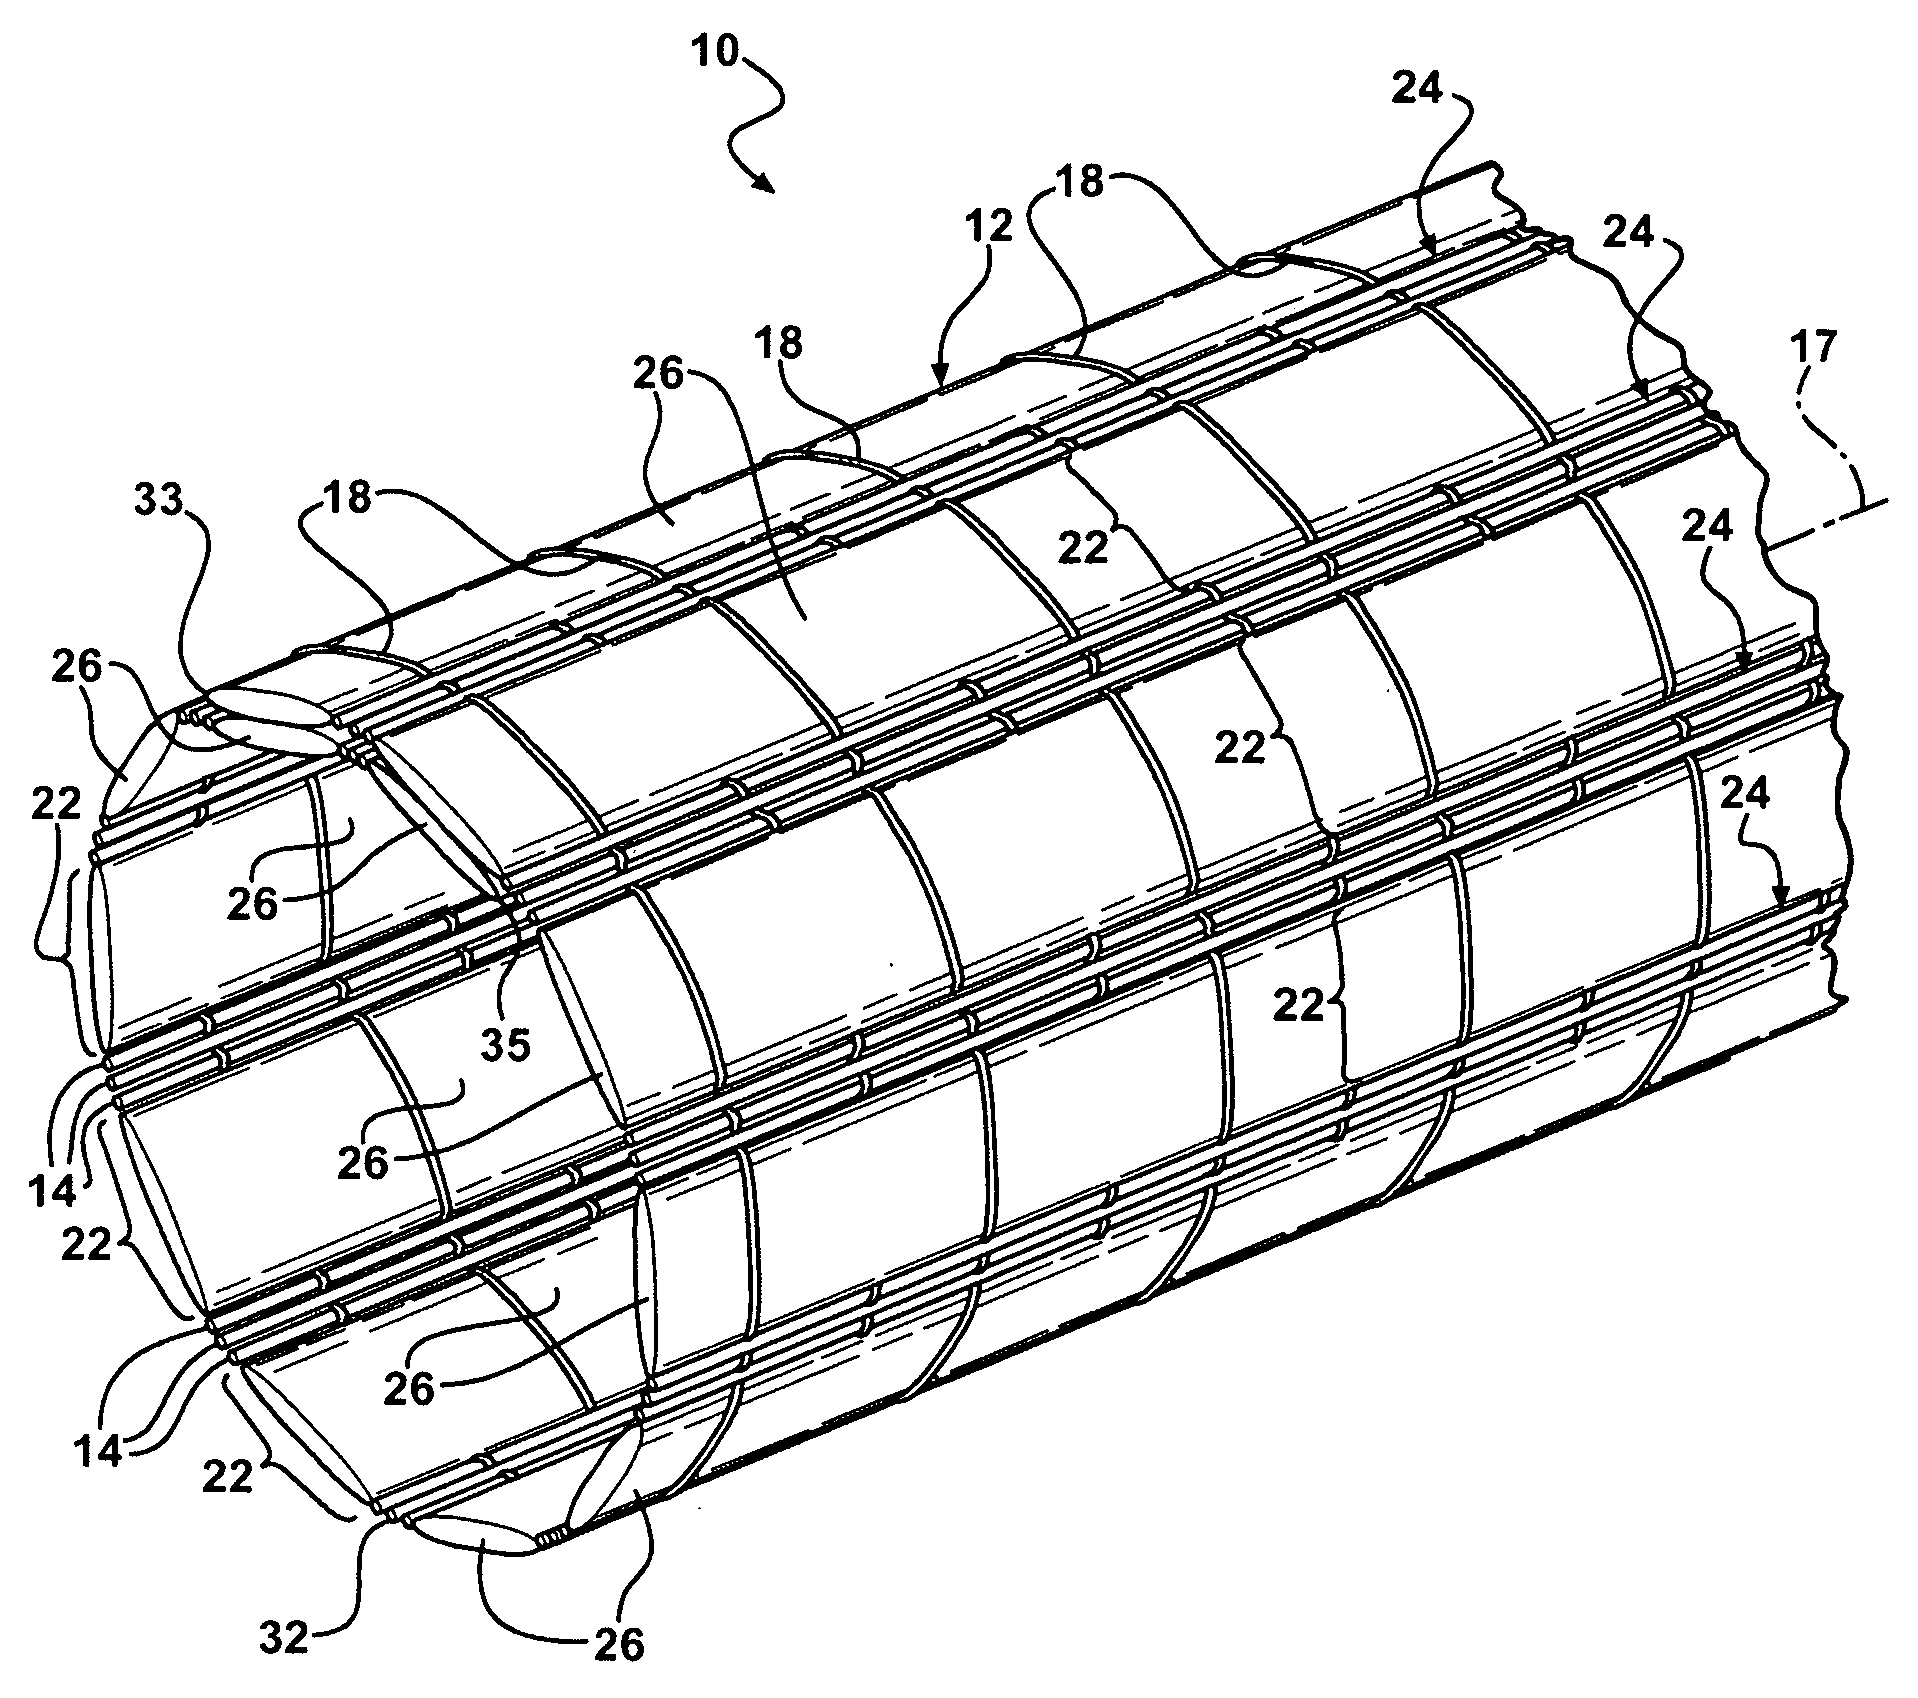 Fabric for end fray resistance and protective sleeves formed therewith and methods of construction